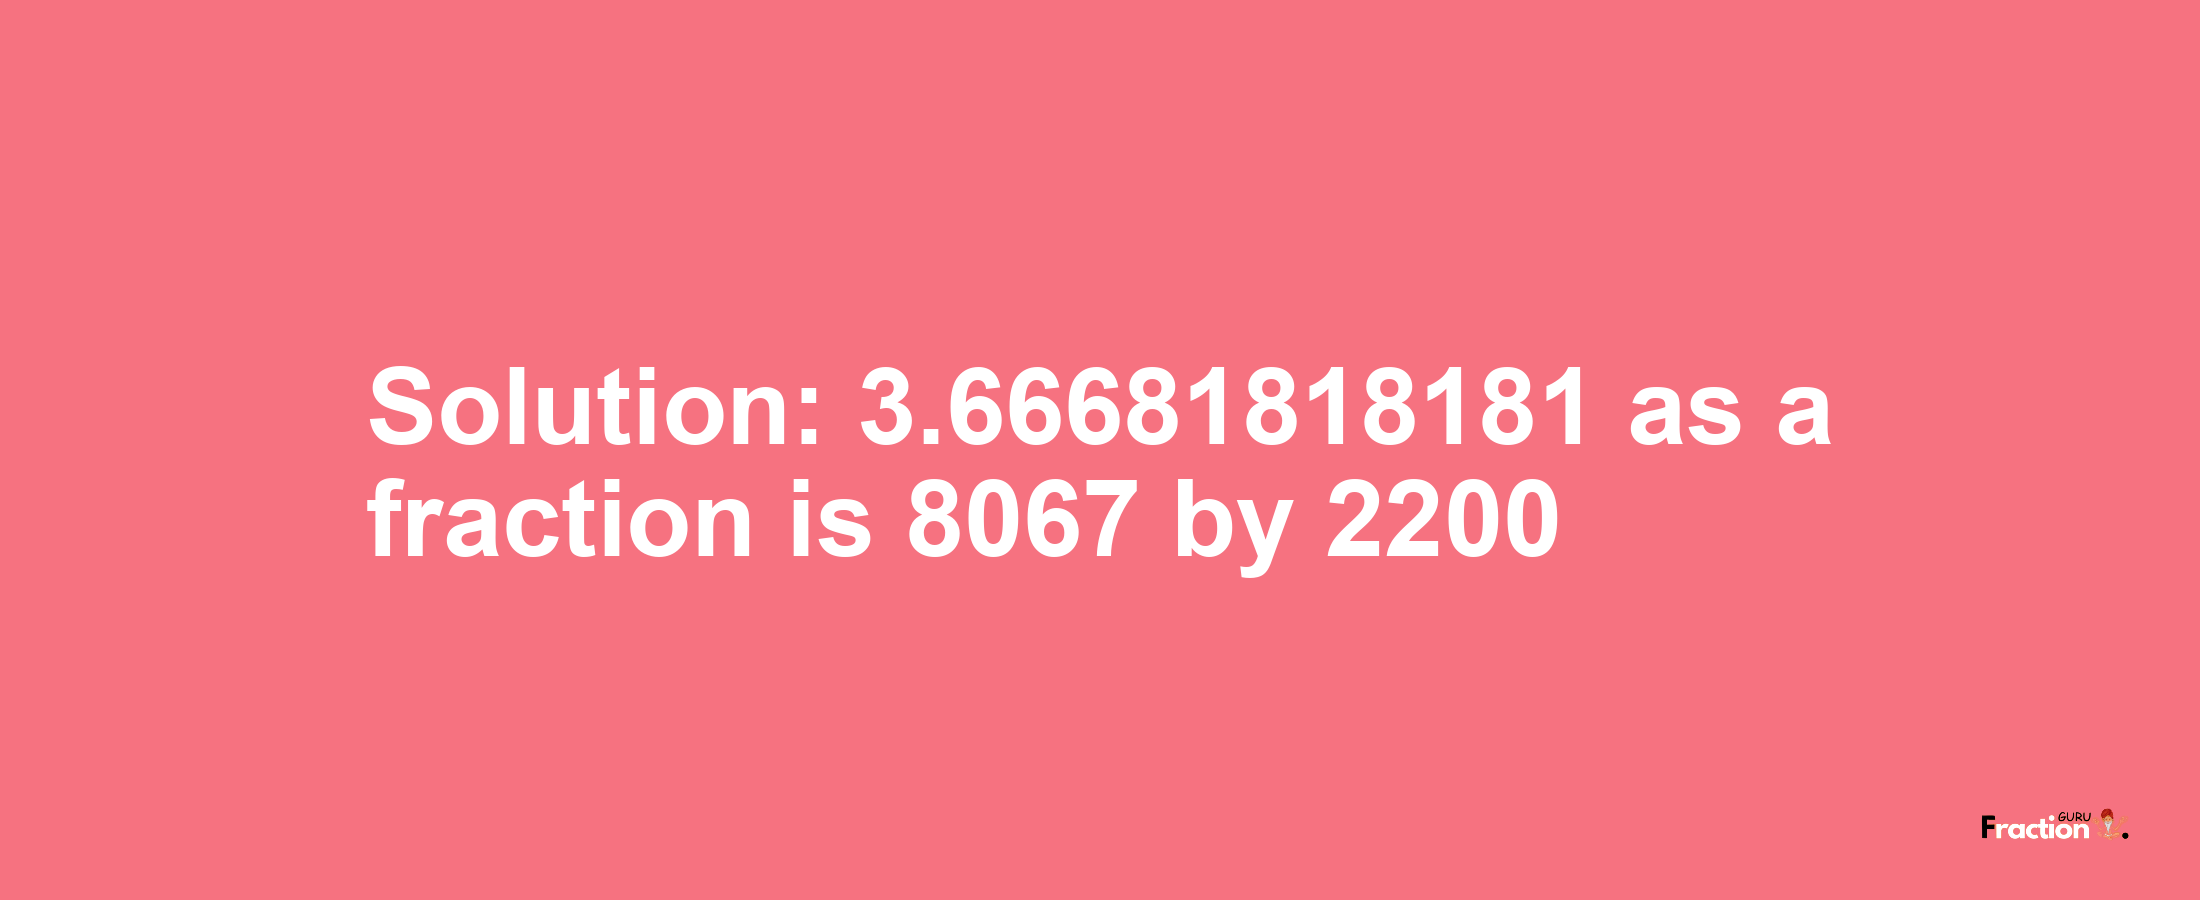 Solution:3.66681818181 as a fraction is 8067/2200